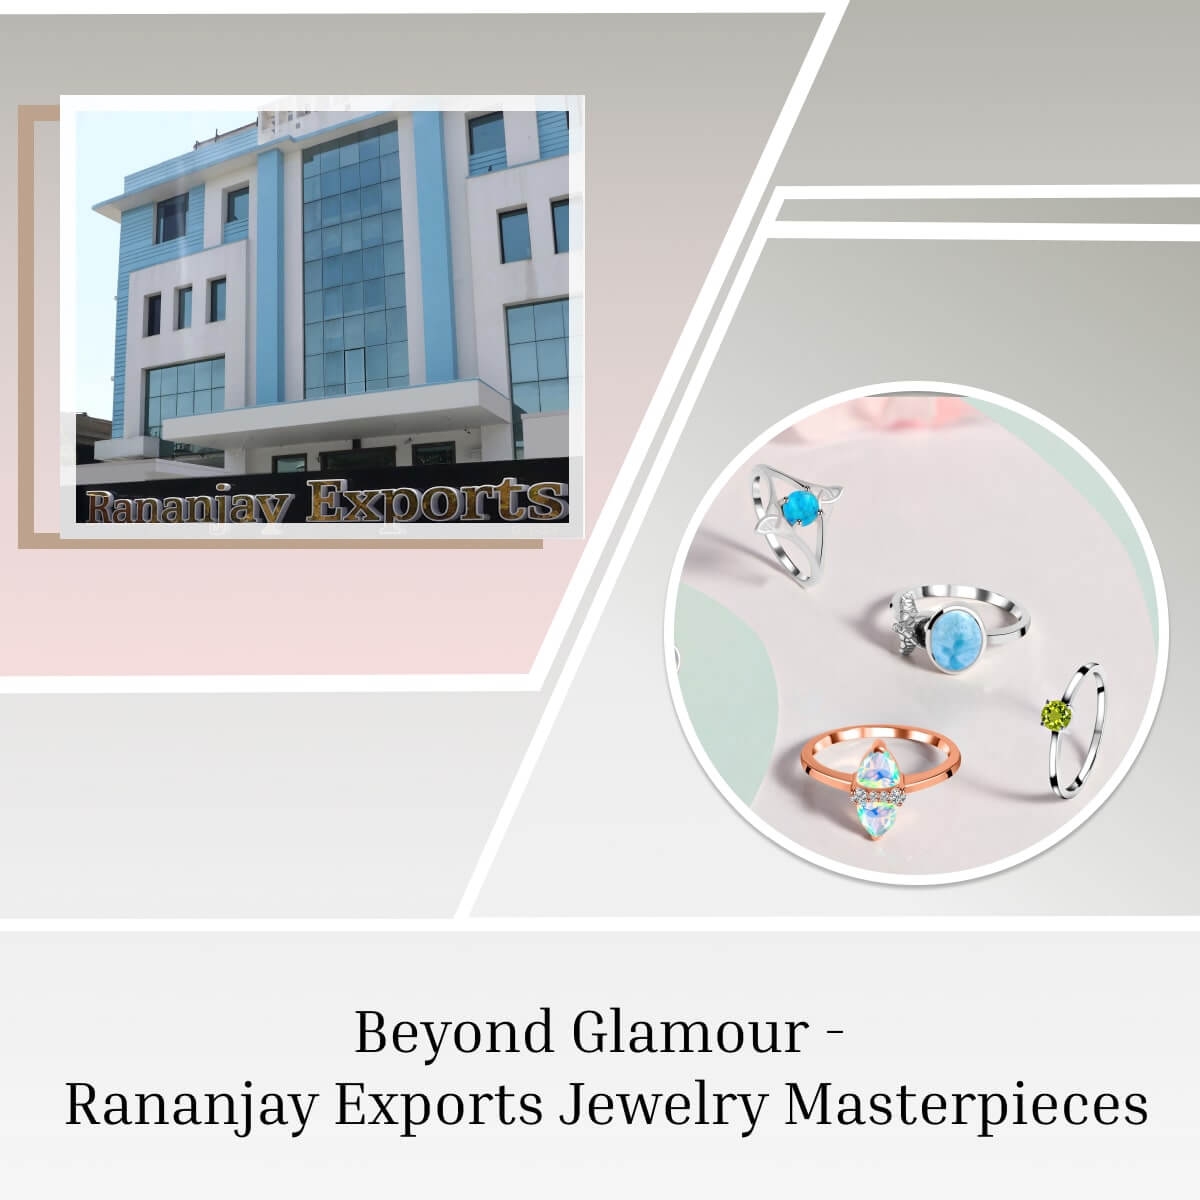 Rananjay Exports is One of The Best Jewelry Brands, Why?